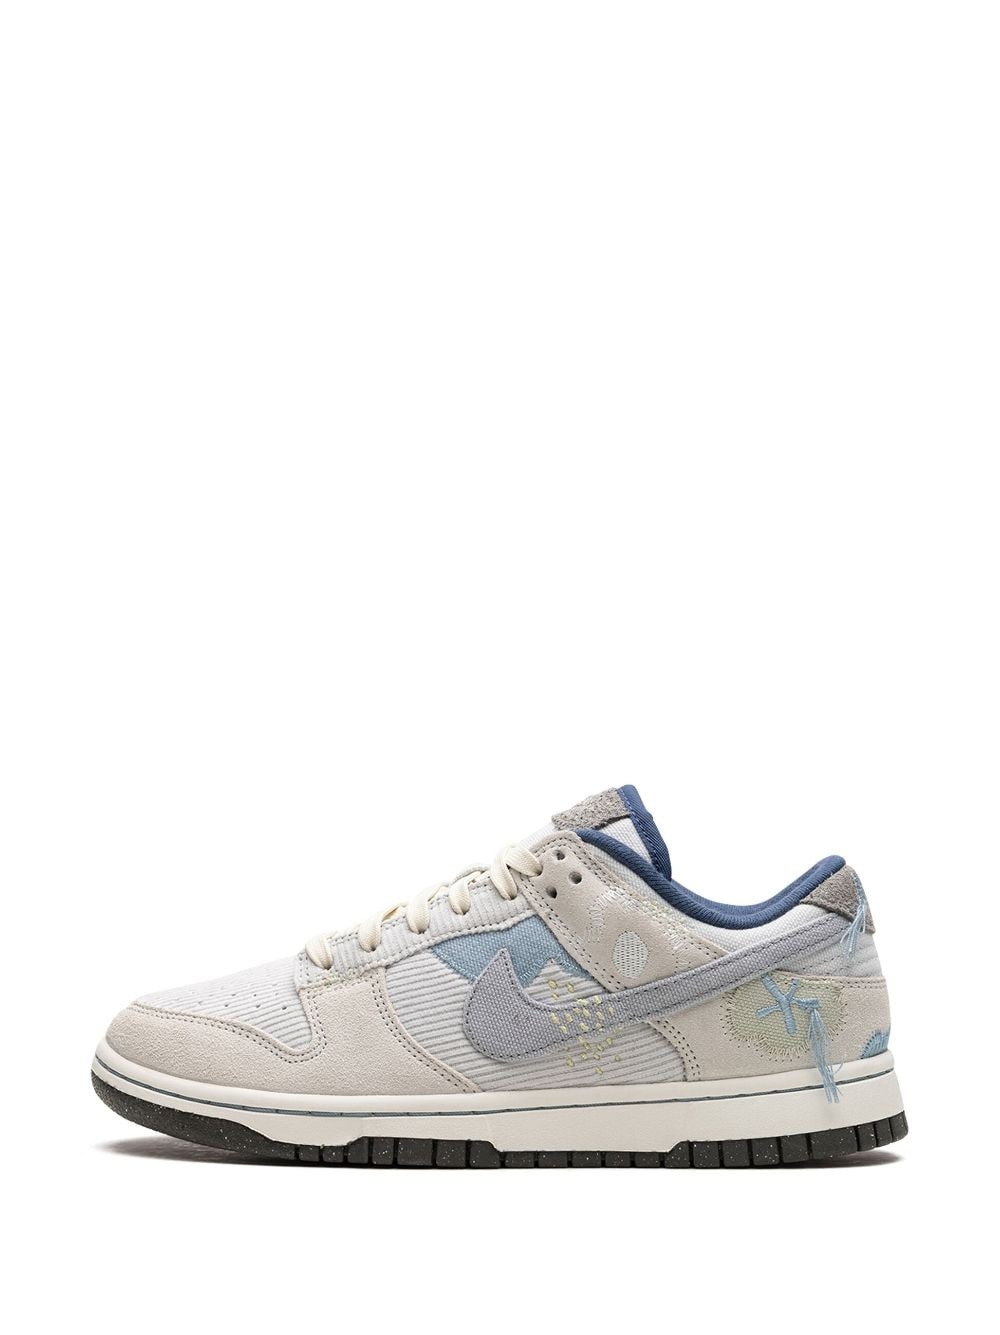 Dunk Low "Photon Dust" sneakers - 5